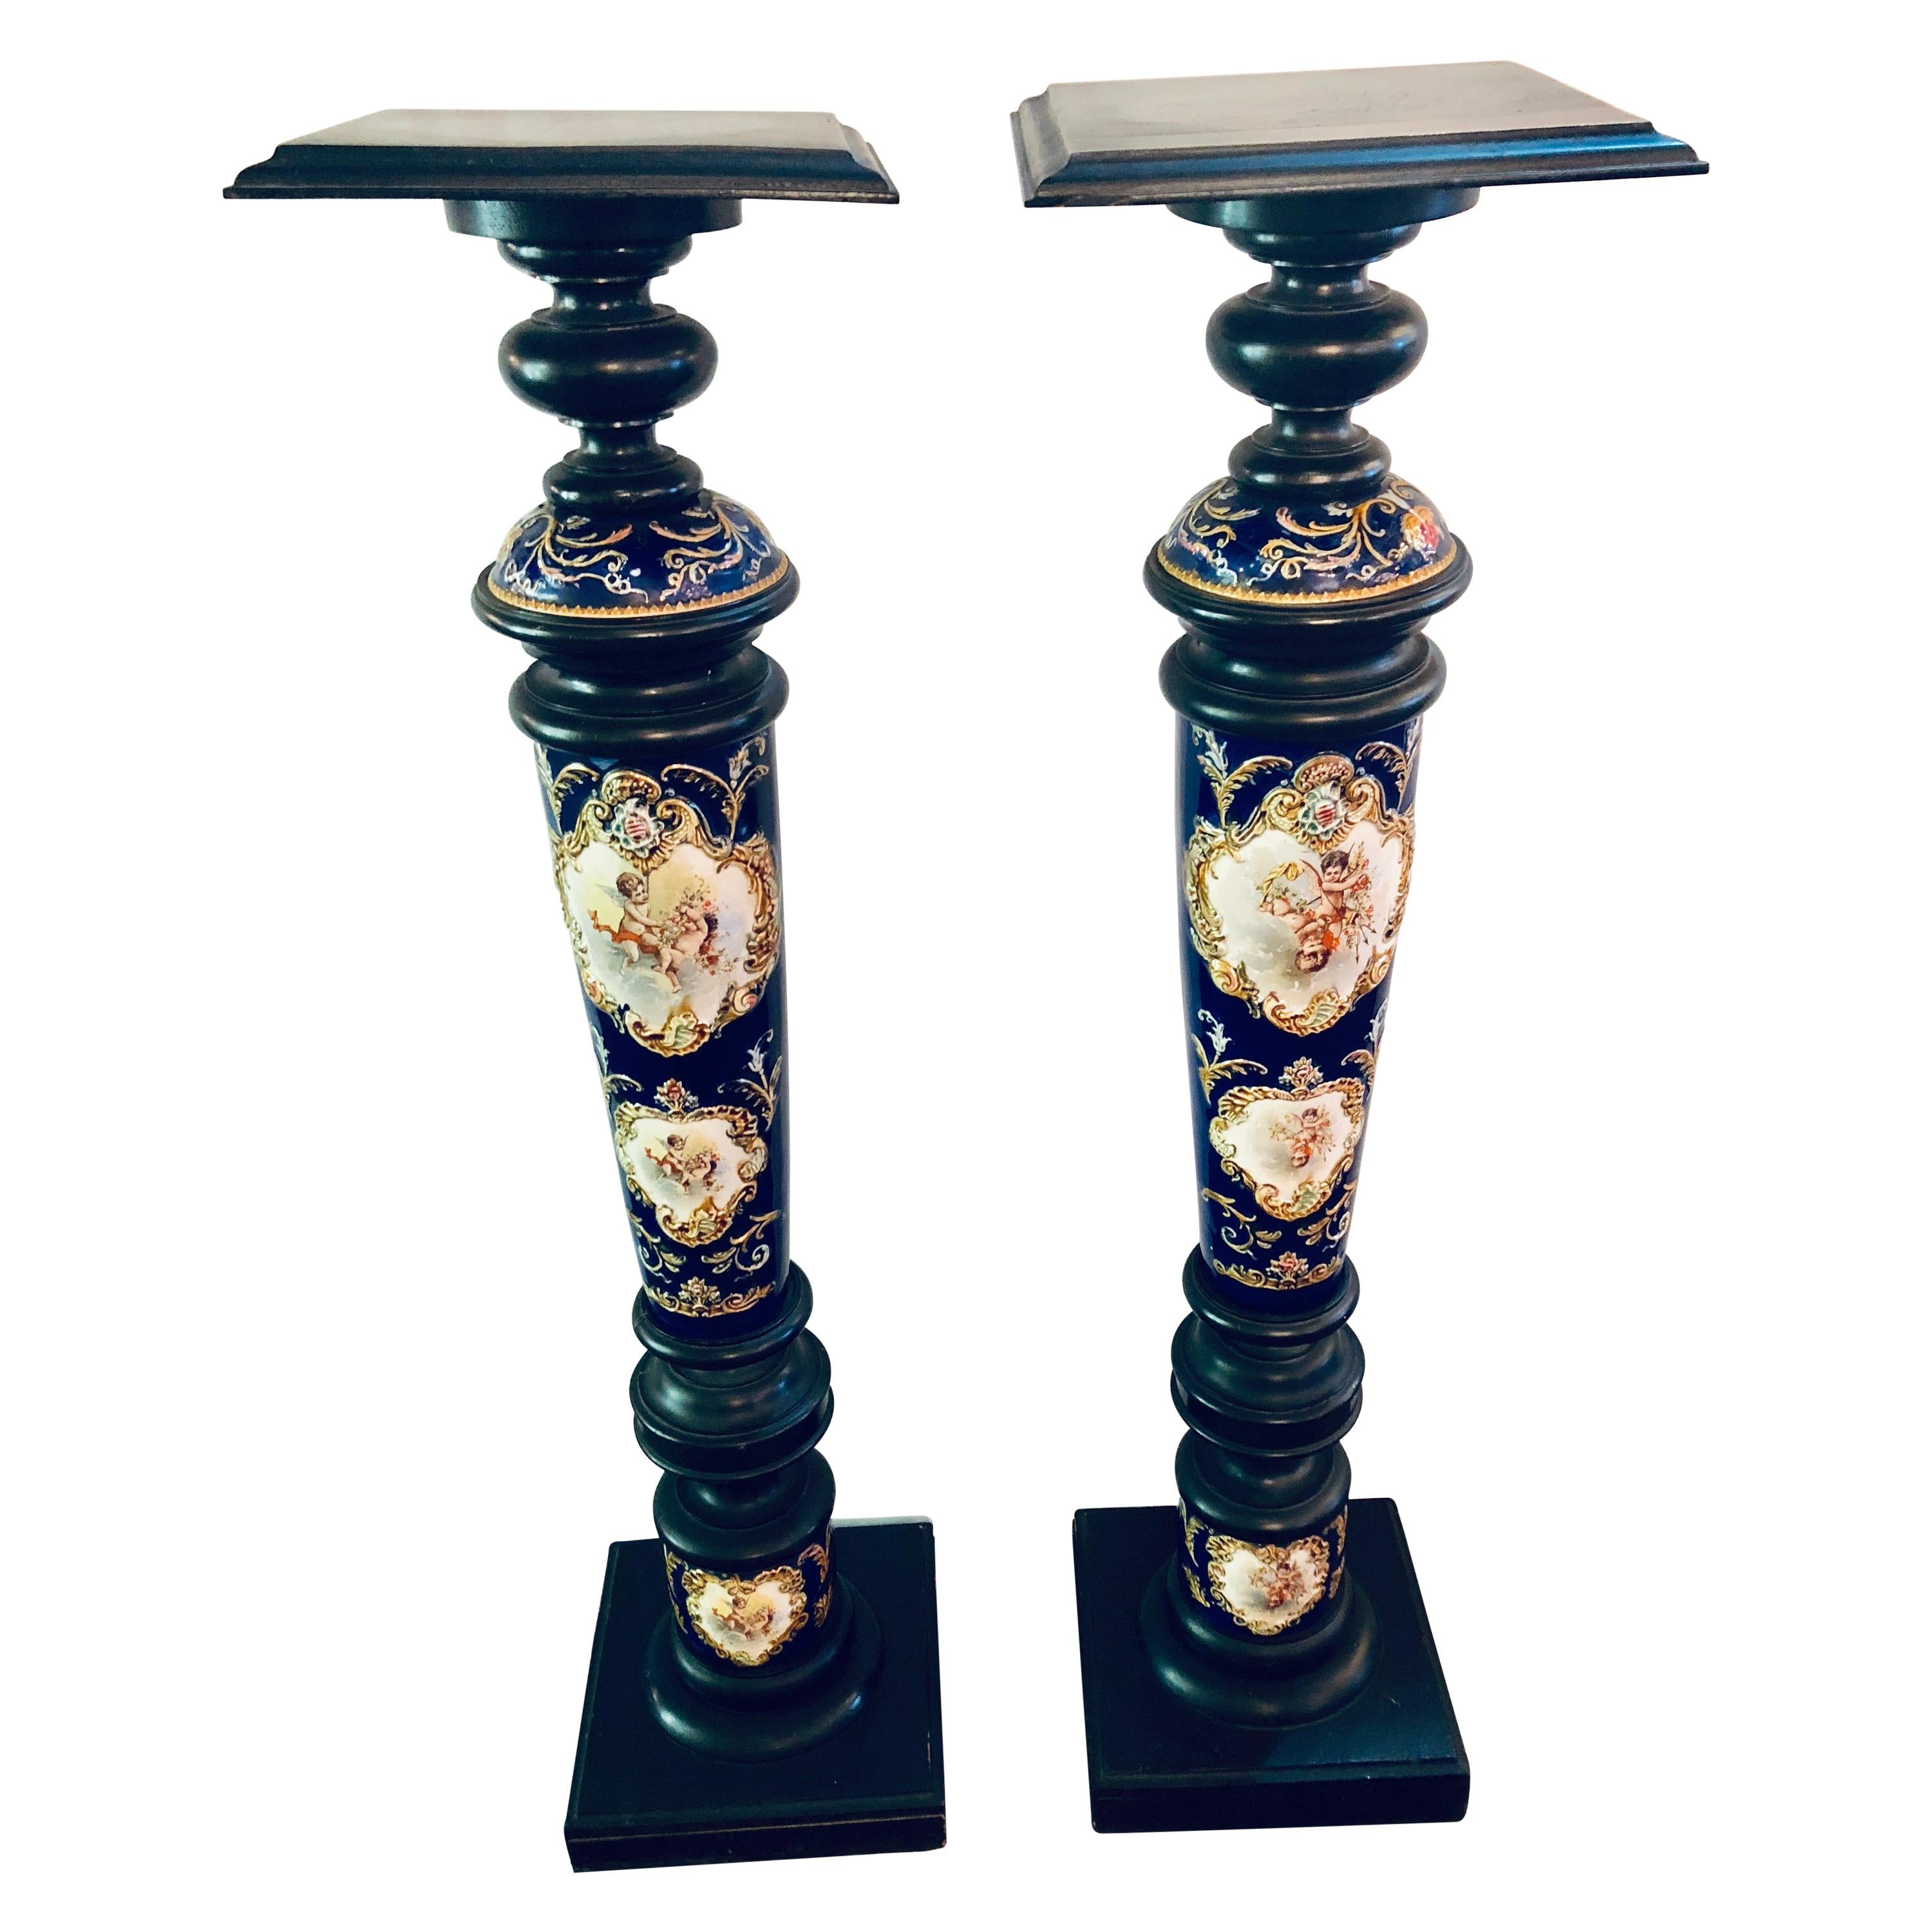 Pair of Royal Vienna Style Porcelain and Ebony Column Pedestals